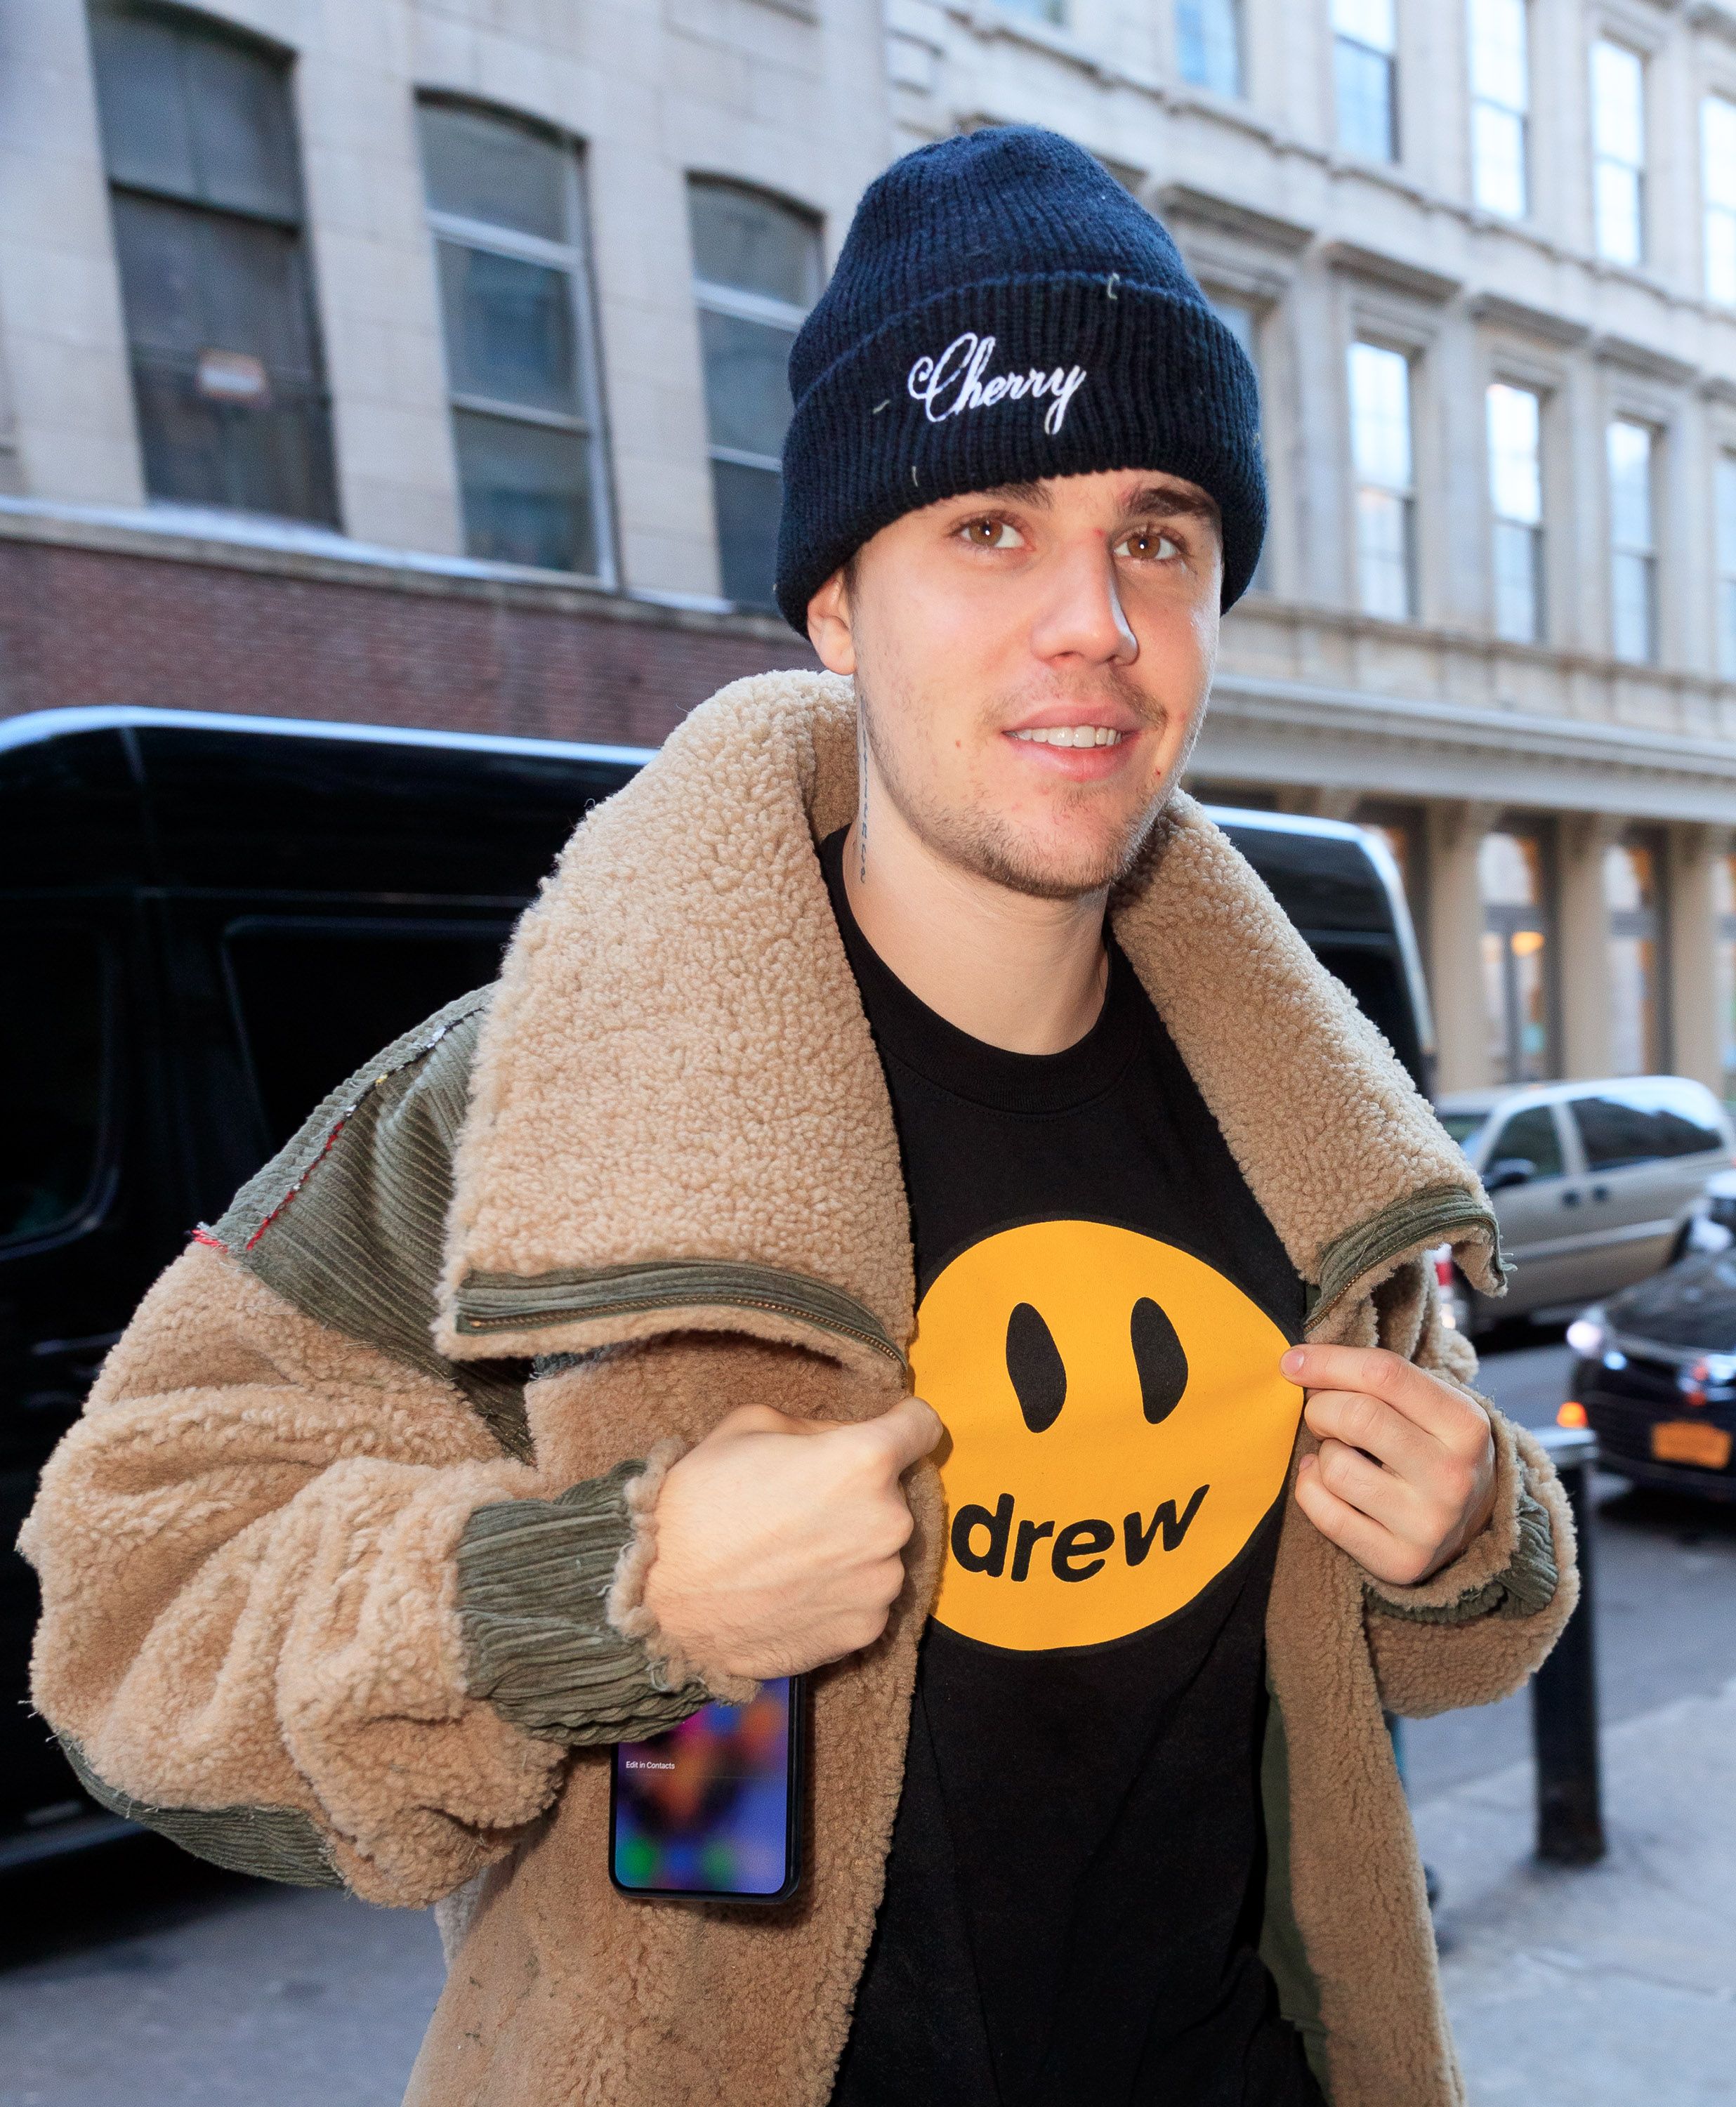 https://hips.hearstapps.com/hmg-prod/images/justin-bieber-shows-off-a-drew-shirt-when-out-and-about-on-news-photo-1127630014-1553779611.jpg